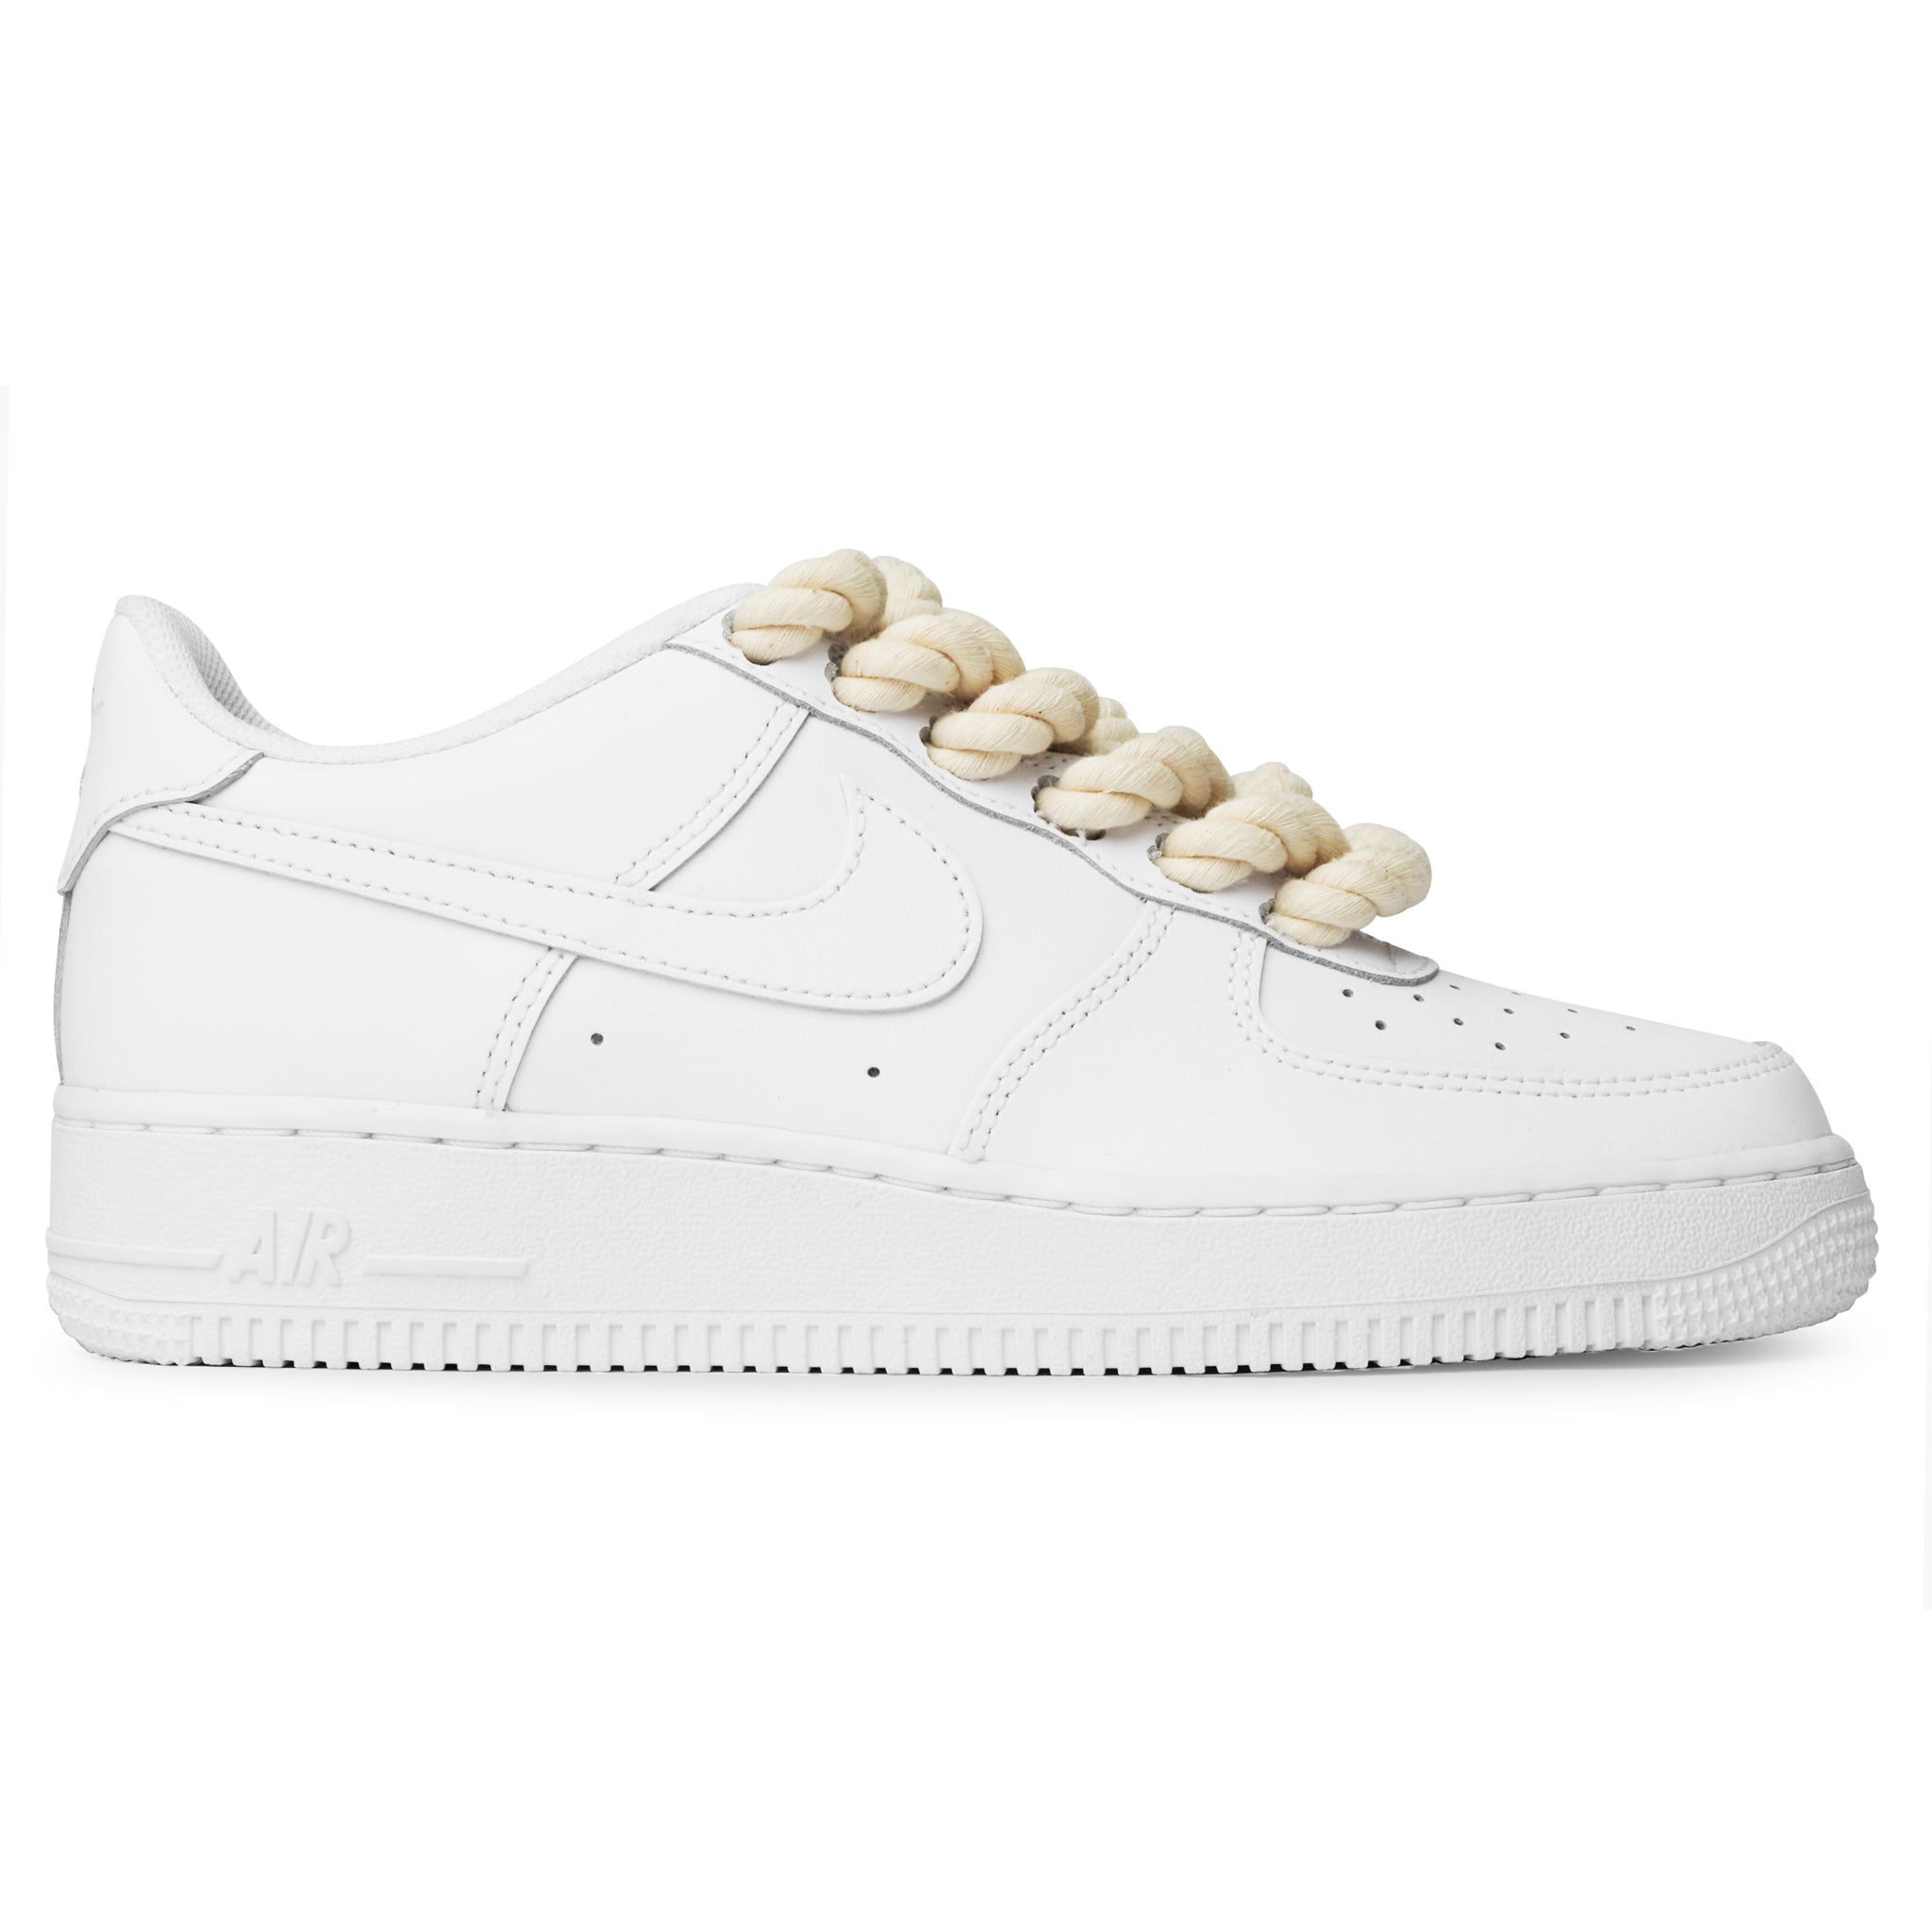 Image of Nike Air Force 1 Low Rope Lace White